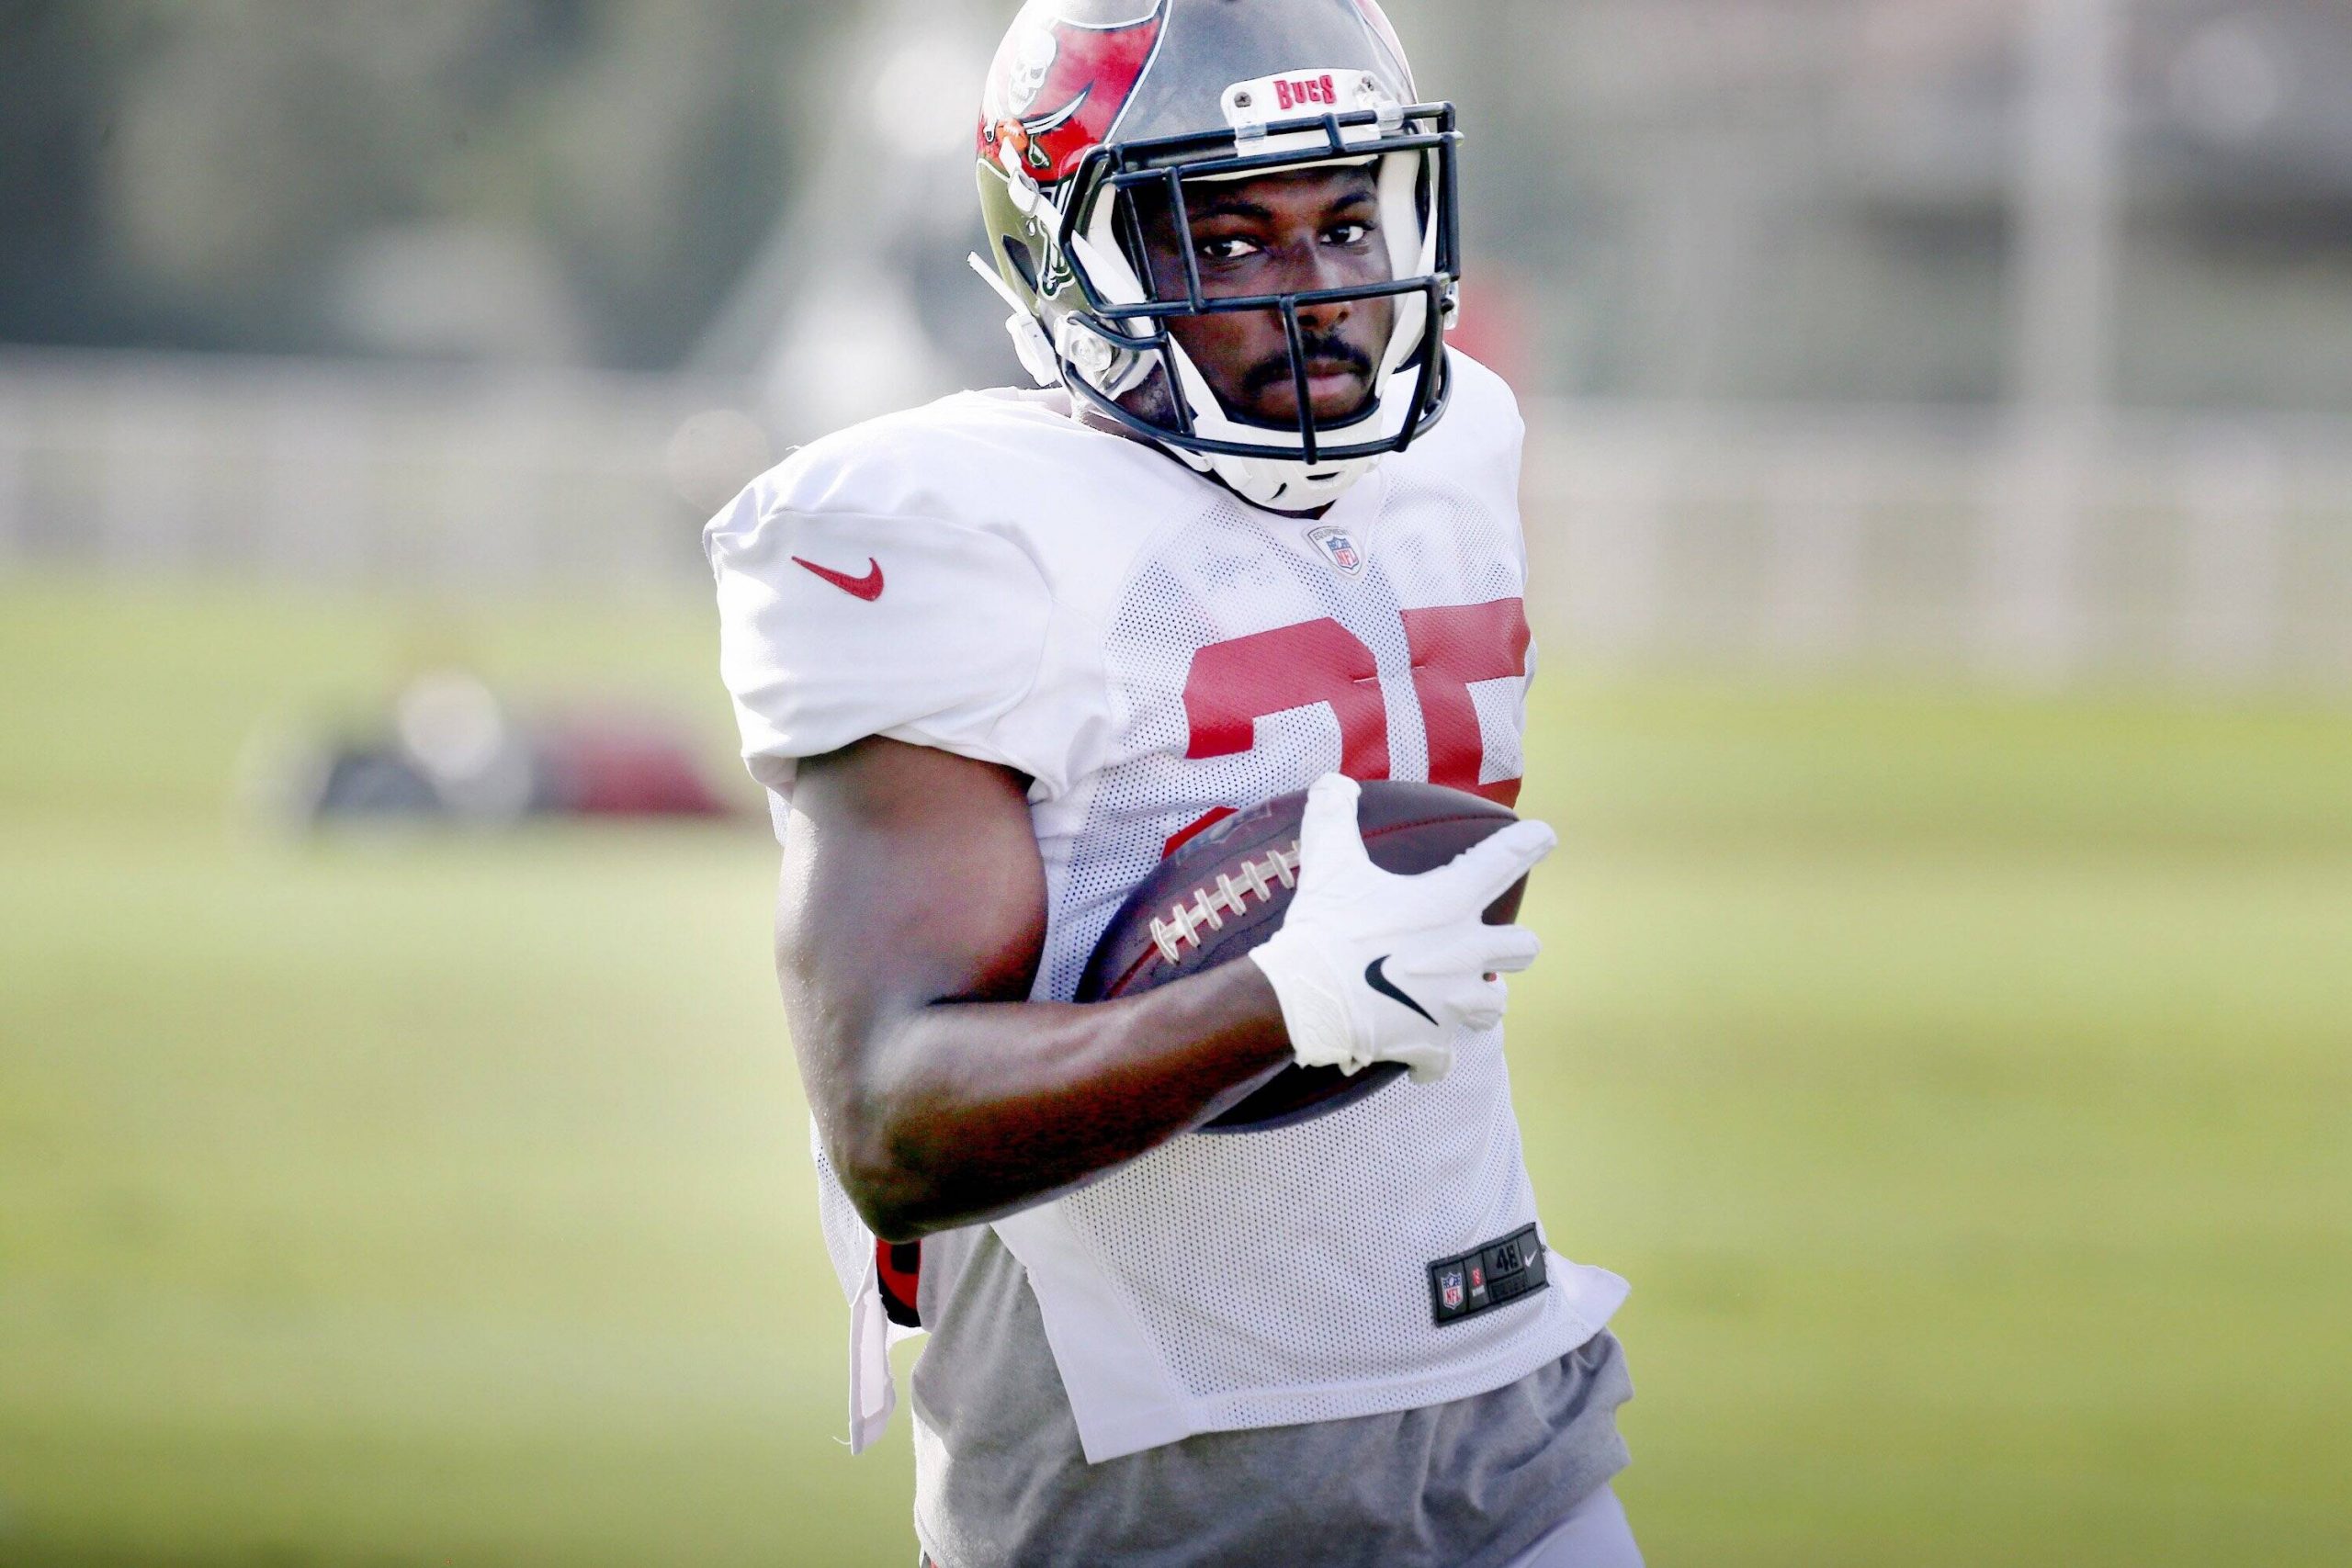 August 23, 2020, Tampa, Florida, USA: Tampa Bay Buccaneers running back LeSean McCoy(25) participates in a Bucs training